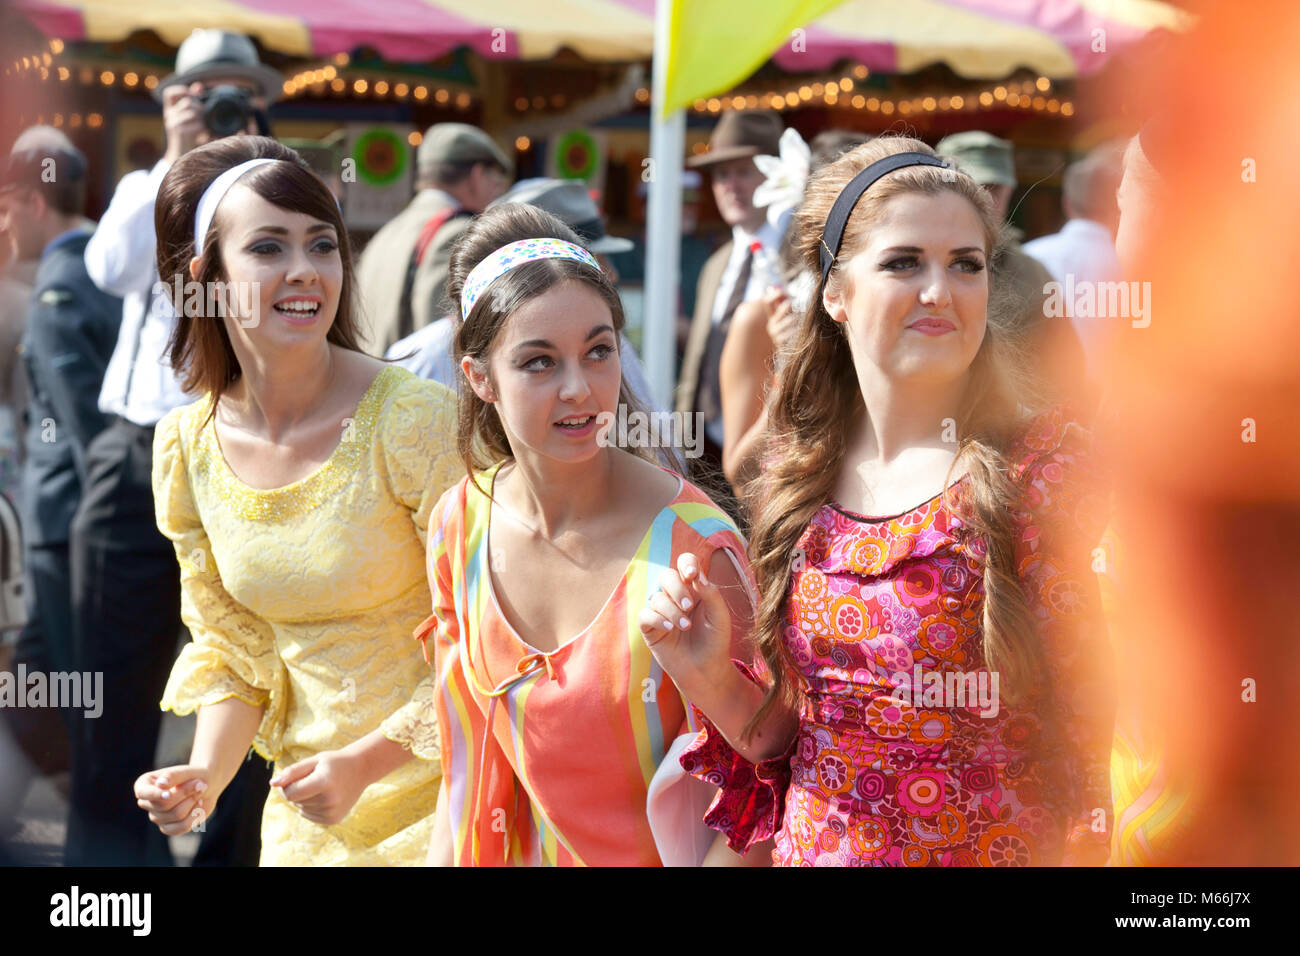 Three young women in brightly coloured 1960's style dresses looking happy attending the Goodwood revival meeting Stock Photo